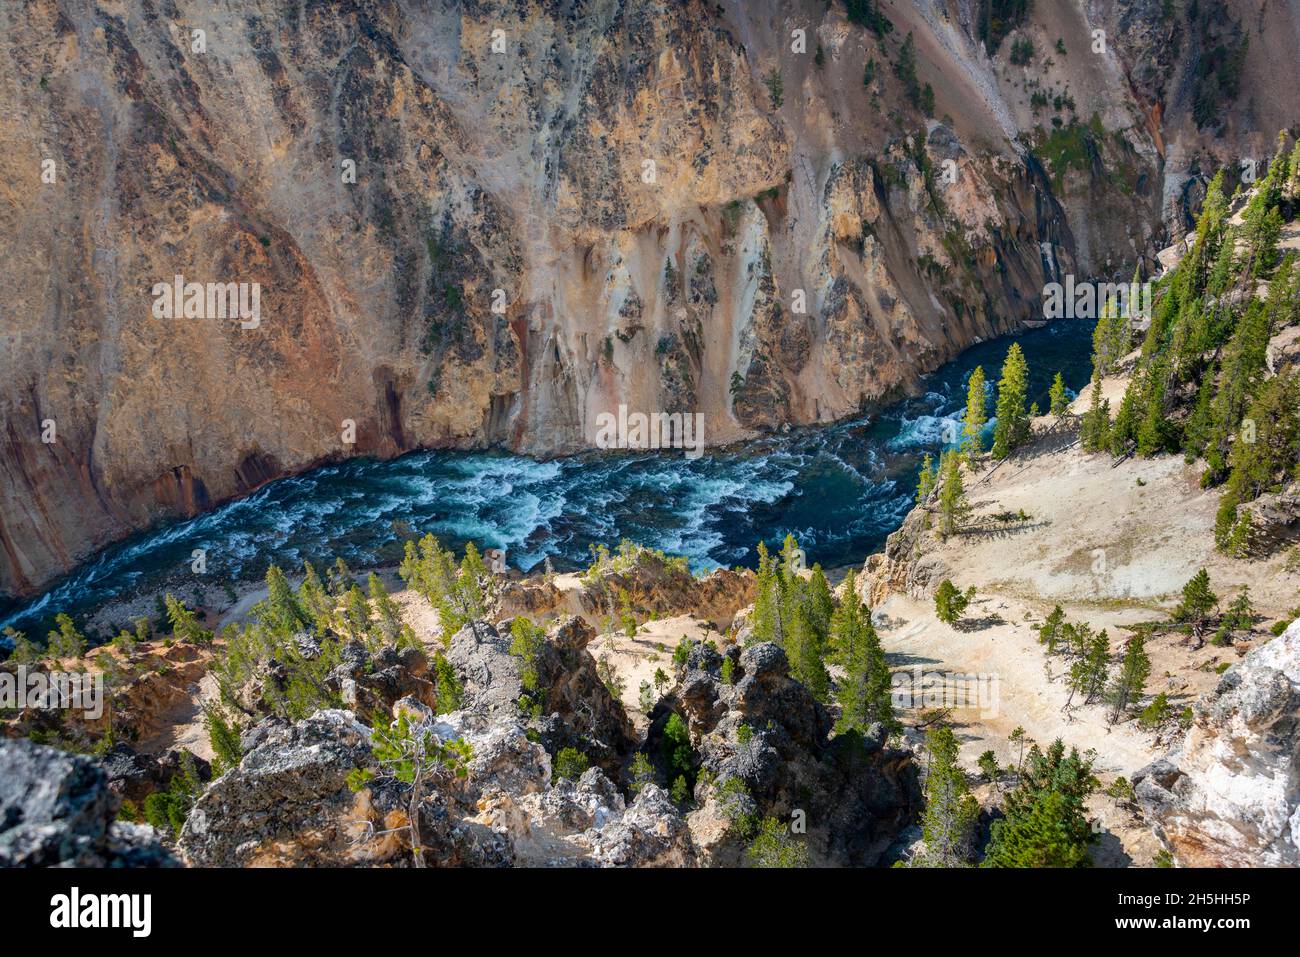 View of river in a canyon, Grand Canyon of the Yellowstone River, view from North Rim, Red Rock Viewpoint, Yellowstone National Park, Wyoming, USA Stock Photo